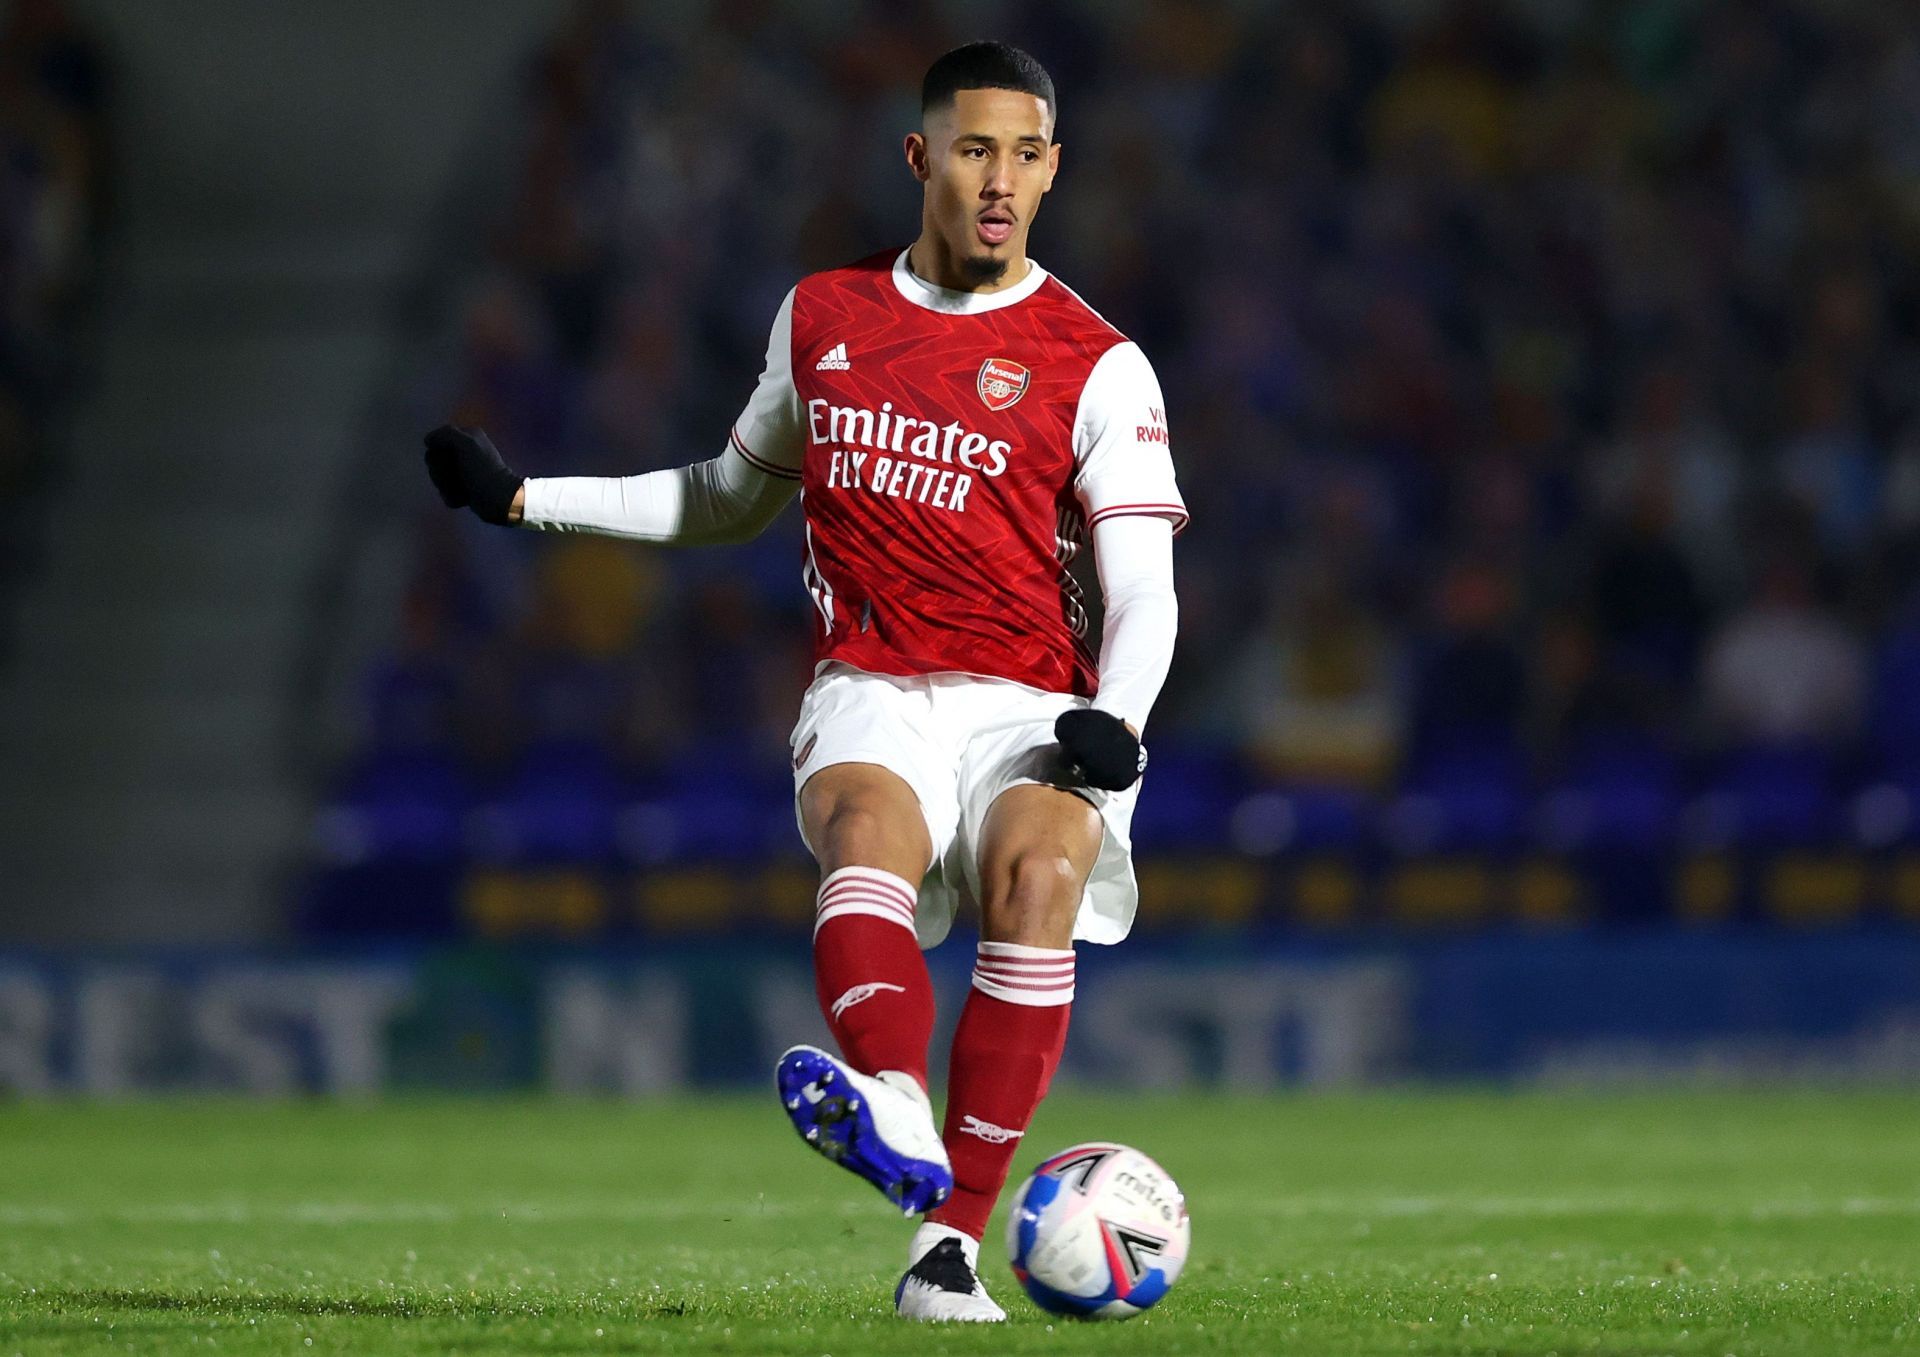 Saliba is yet to make a senior appearance for the Gunners